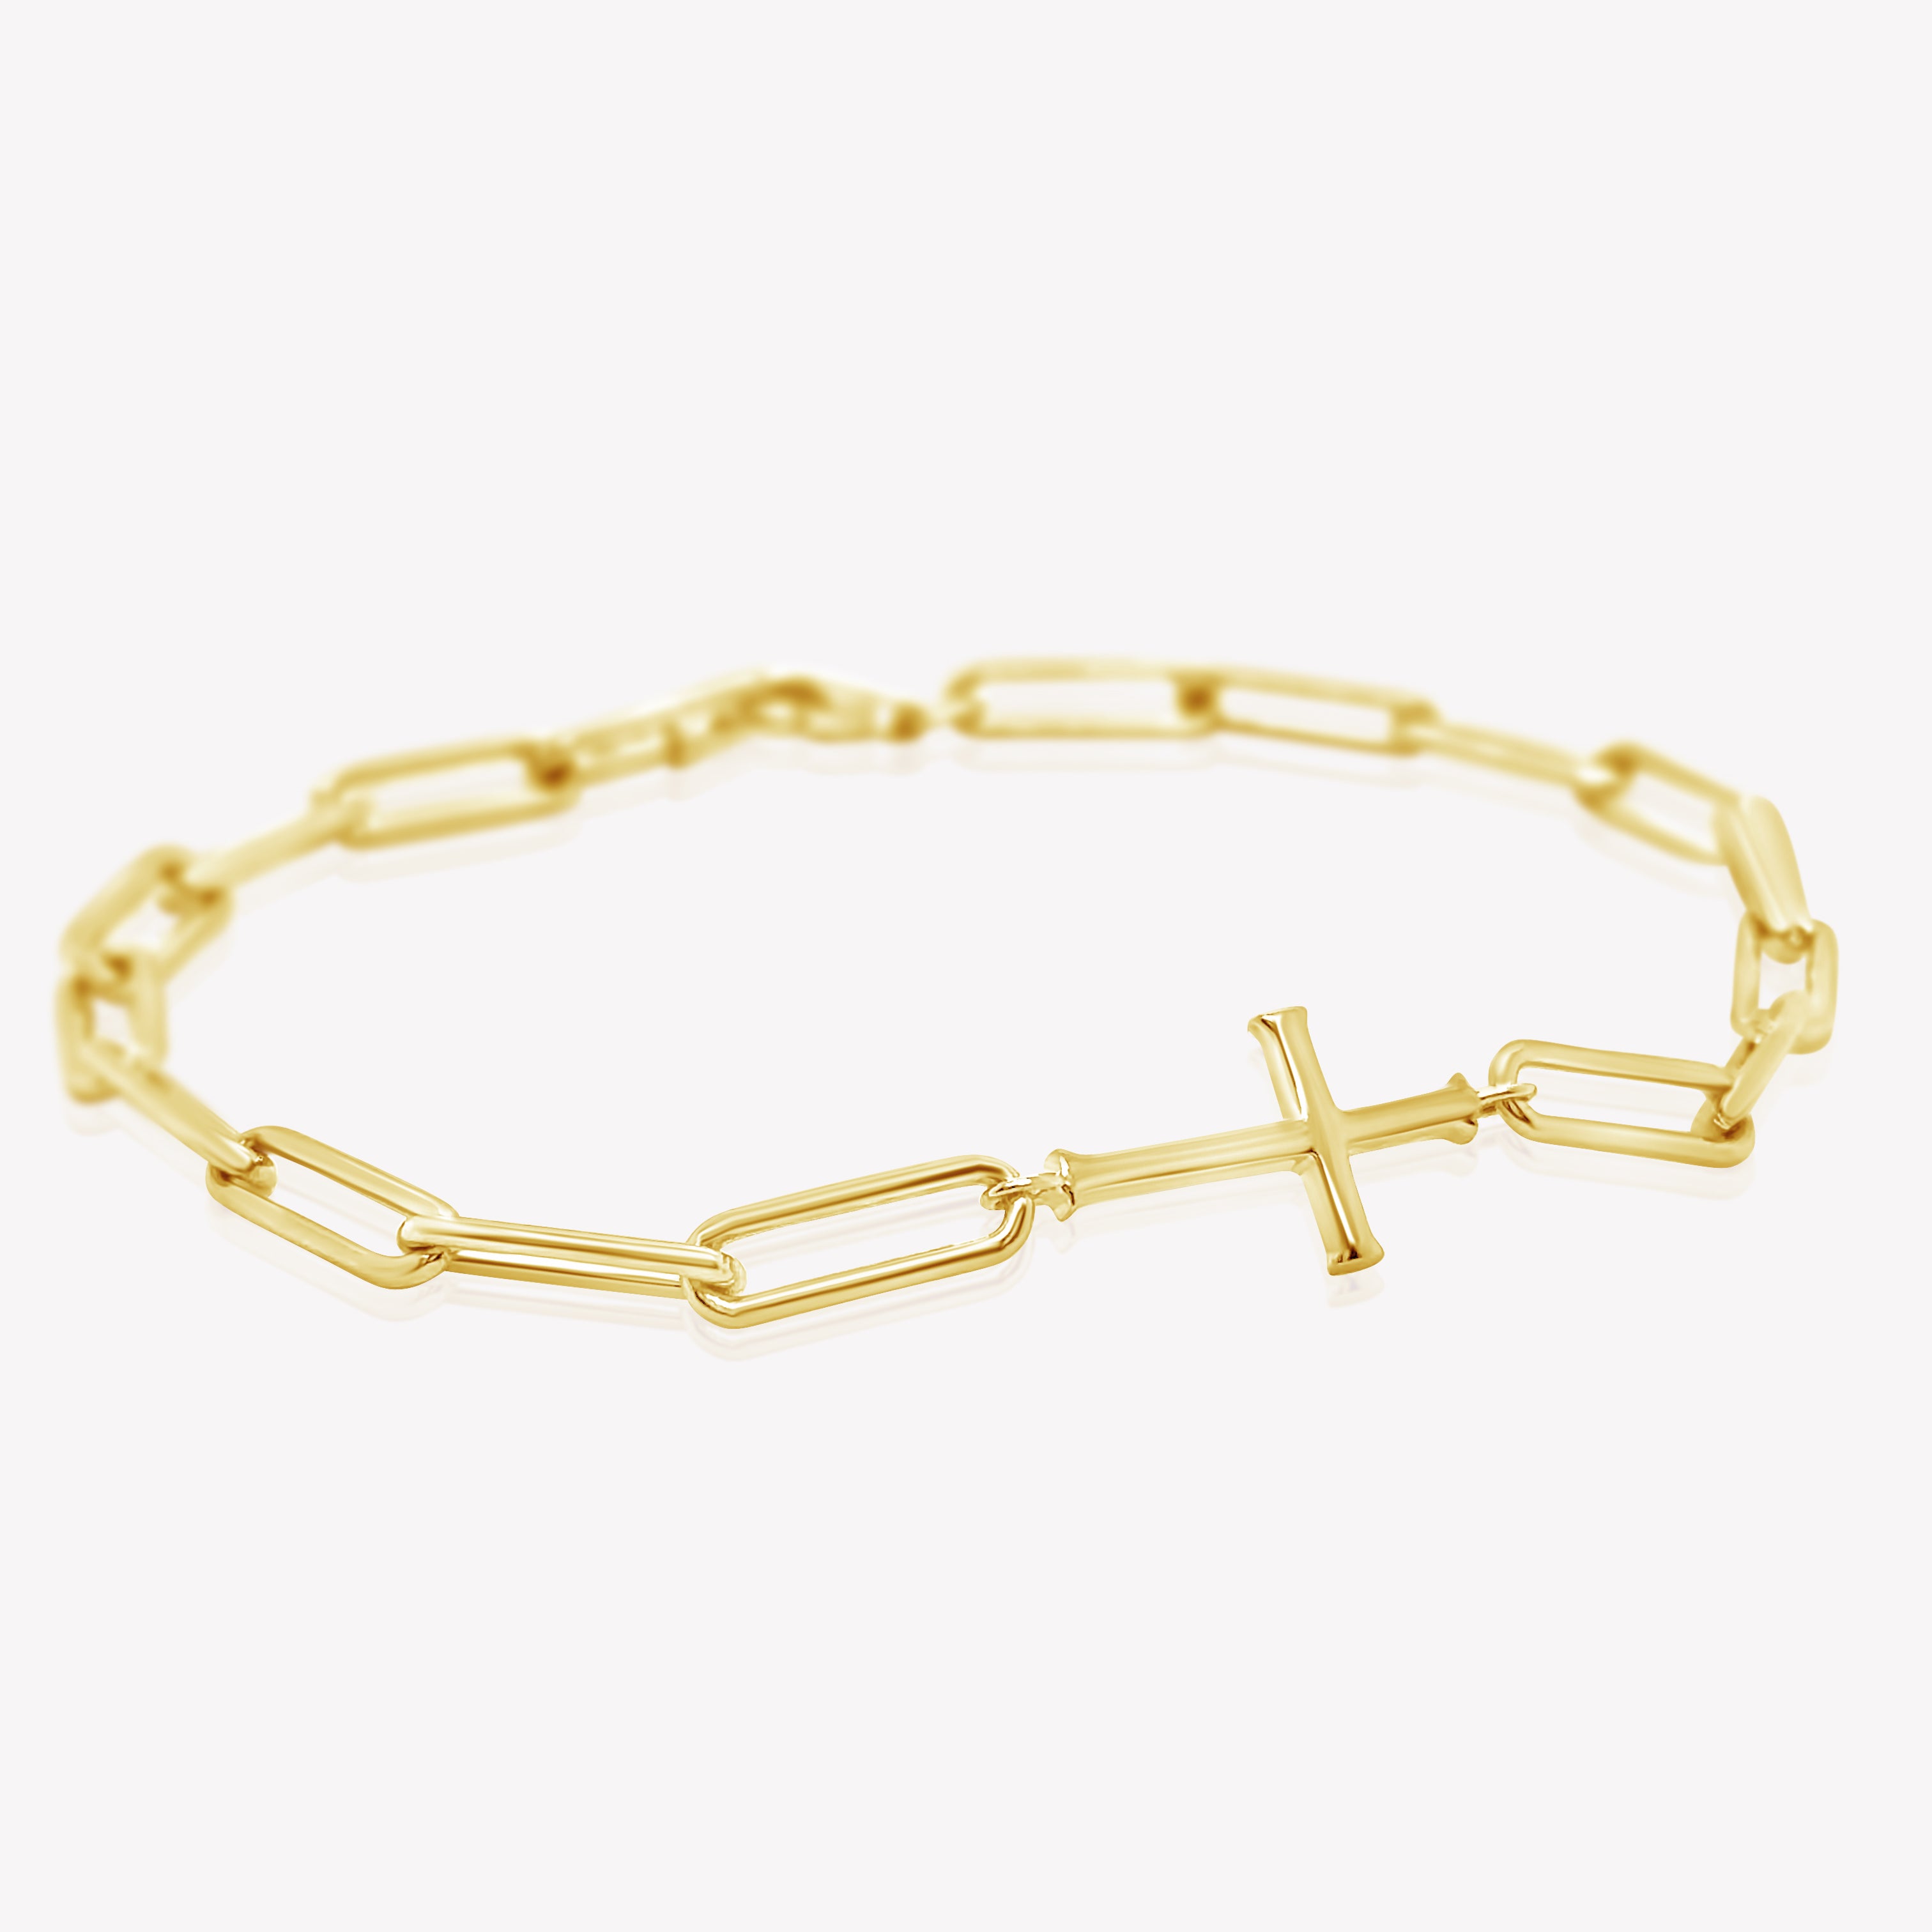 Rizen Jewelry Chain Breaker Bracelet in 18kt yellow gold.  Elegant Cross Pendant breaks up the contemporary paper clip link chain with classic lobster clasp  closure, and circular Rizen tag on last link of chain.